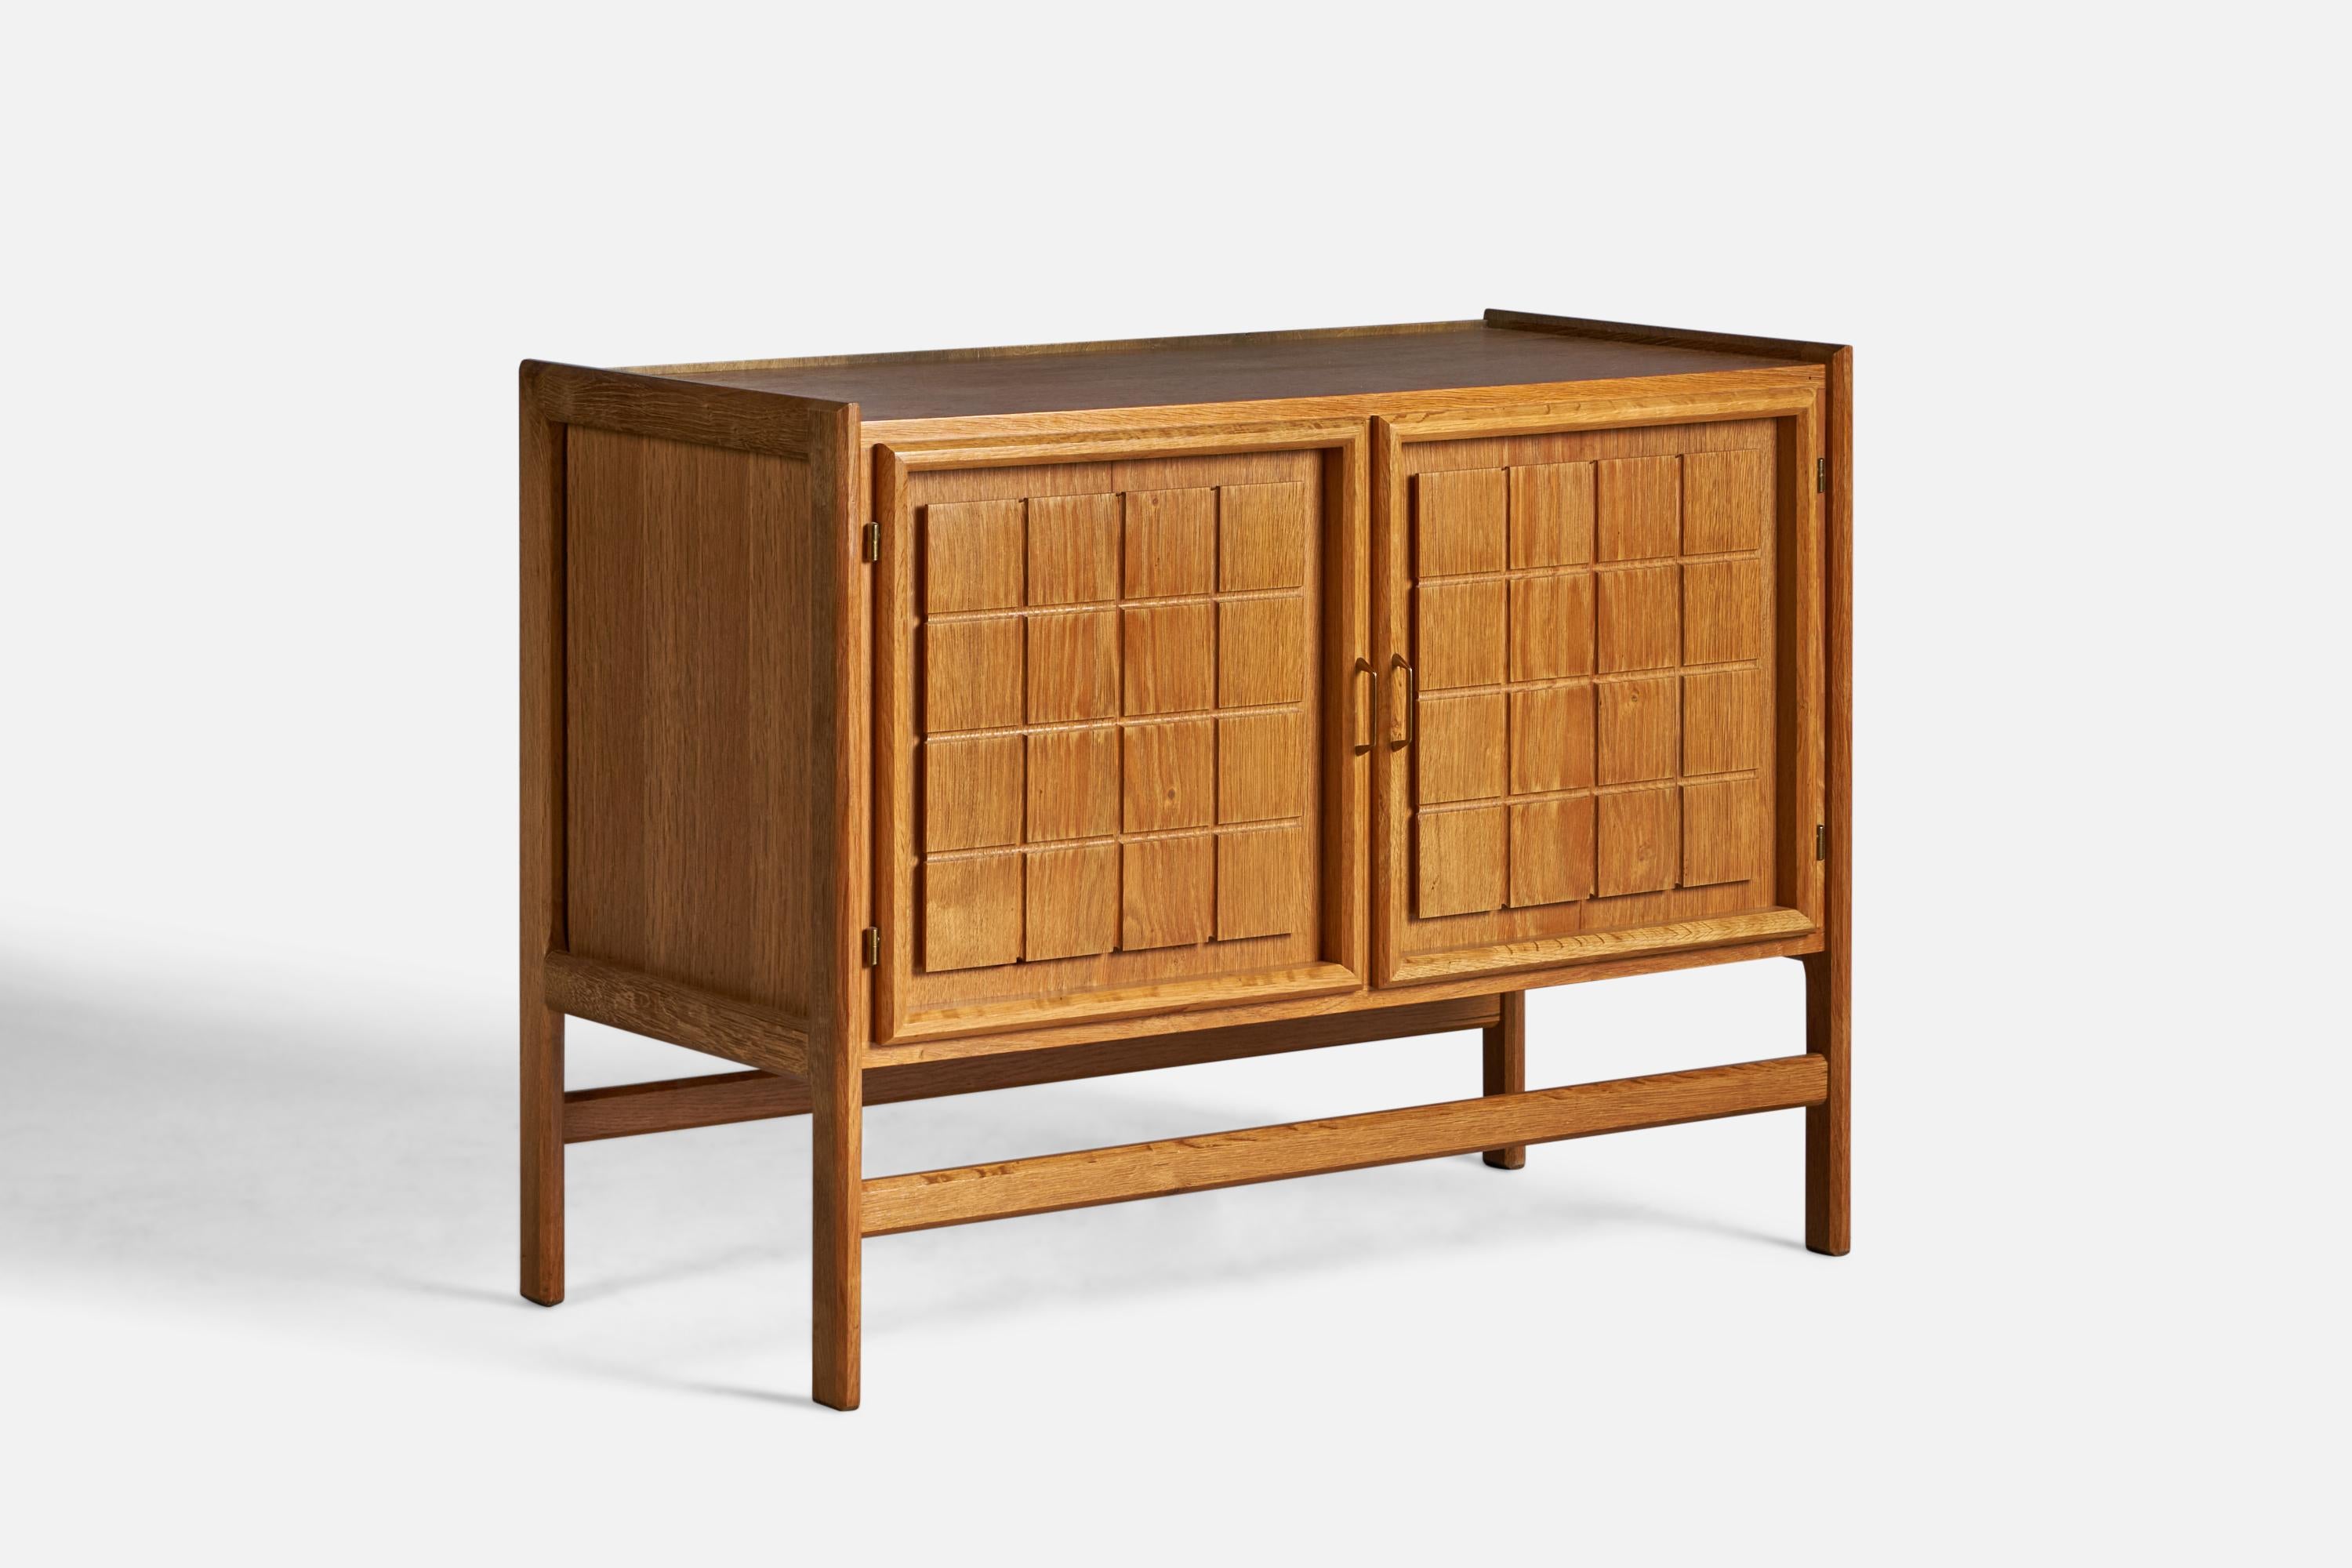 An oak and brass cabinet, designed and produced in Denmark, 1950s.